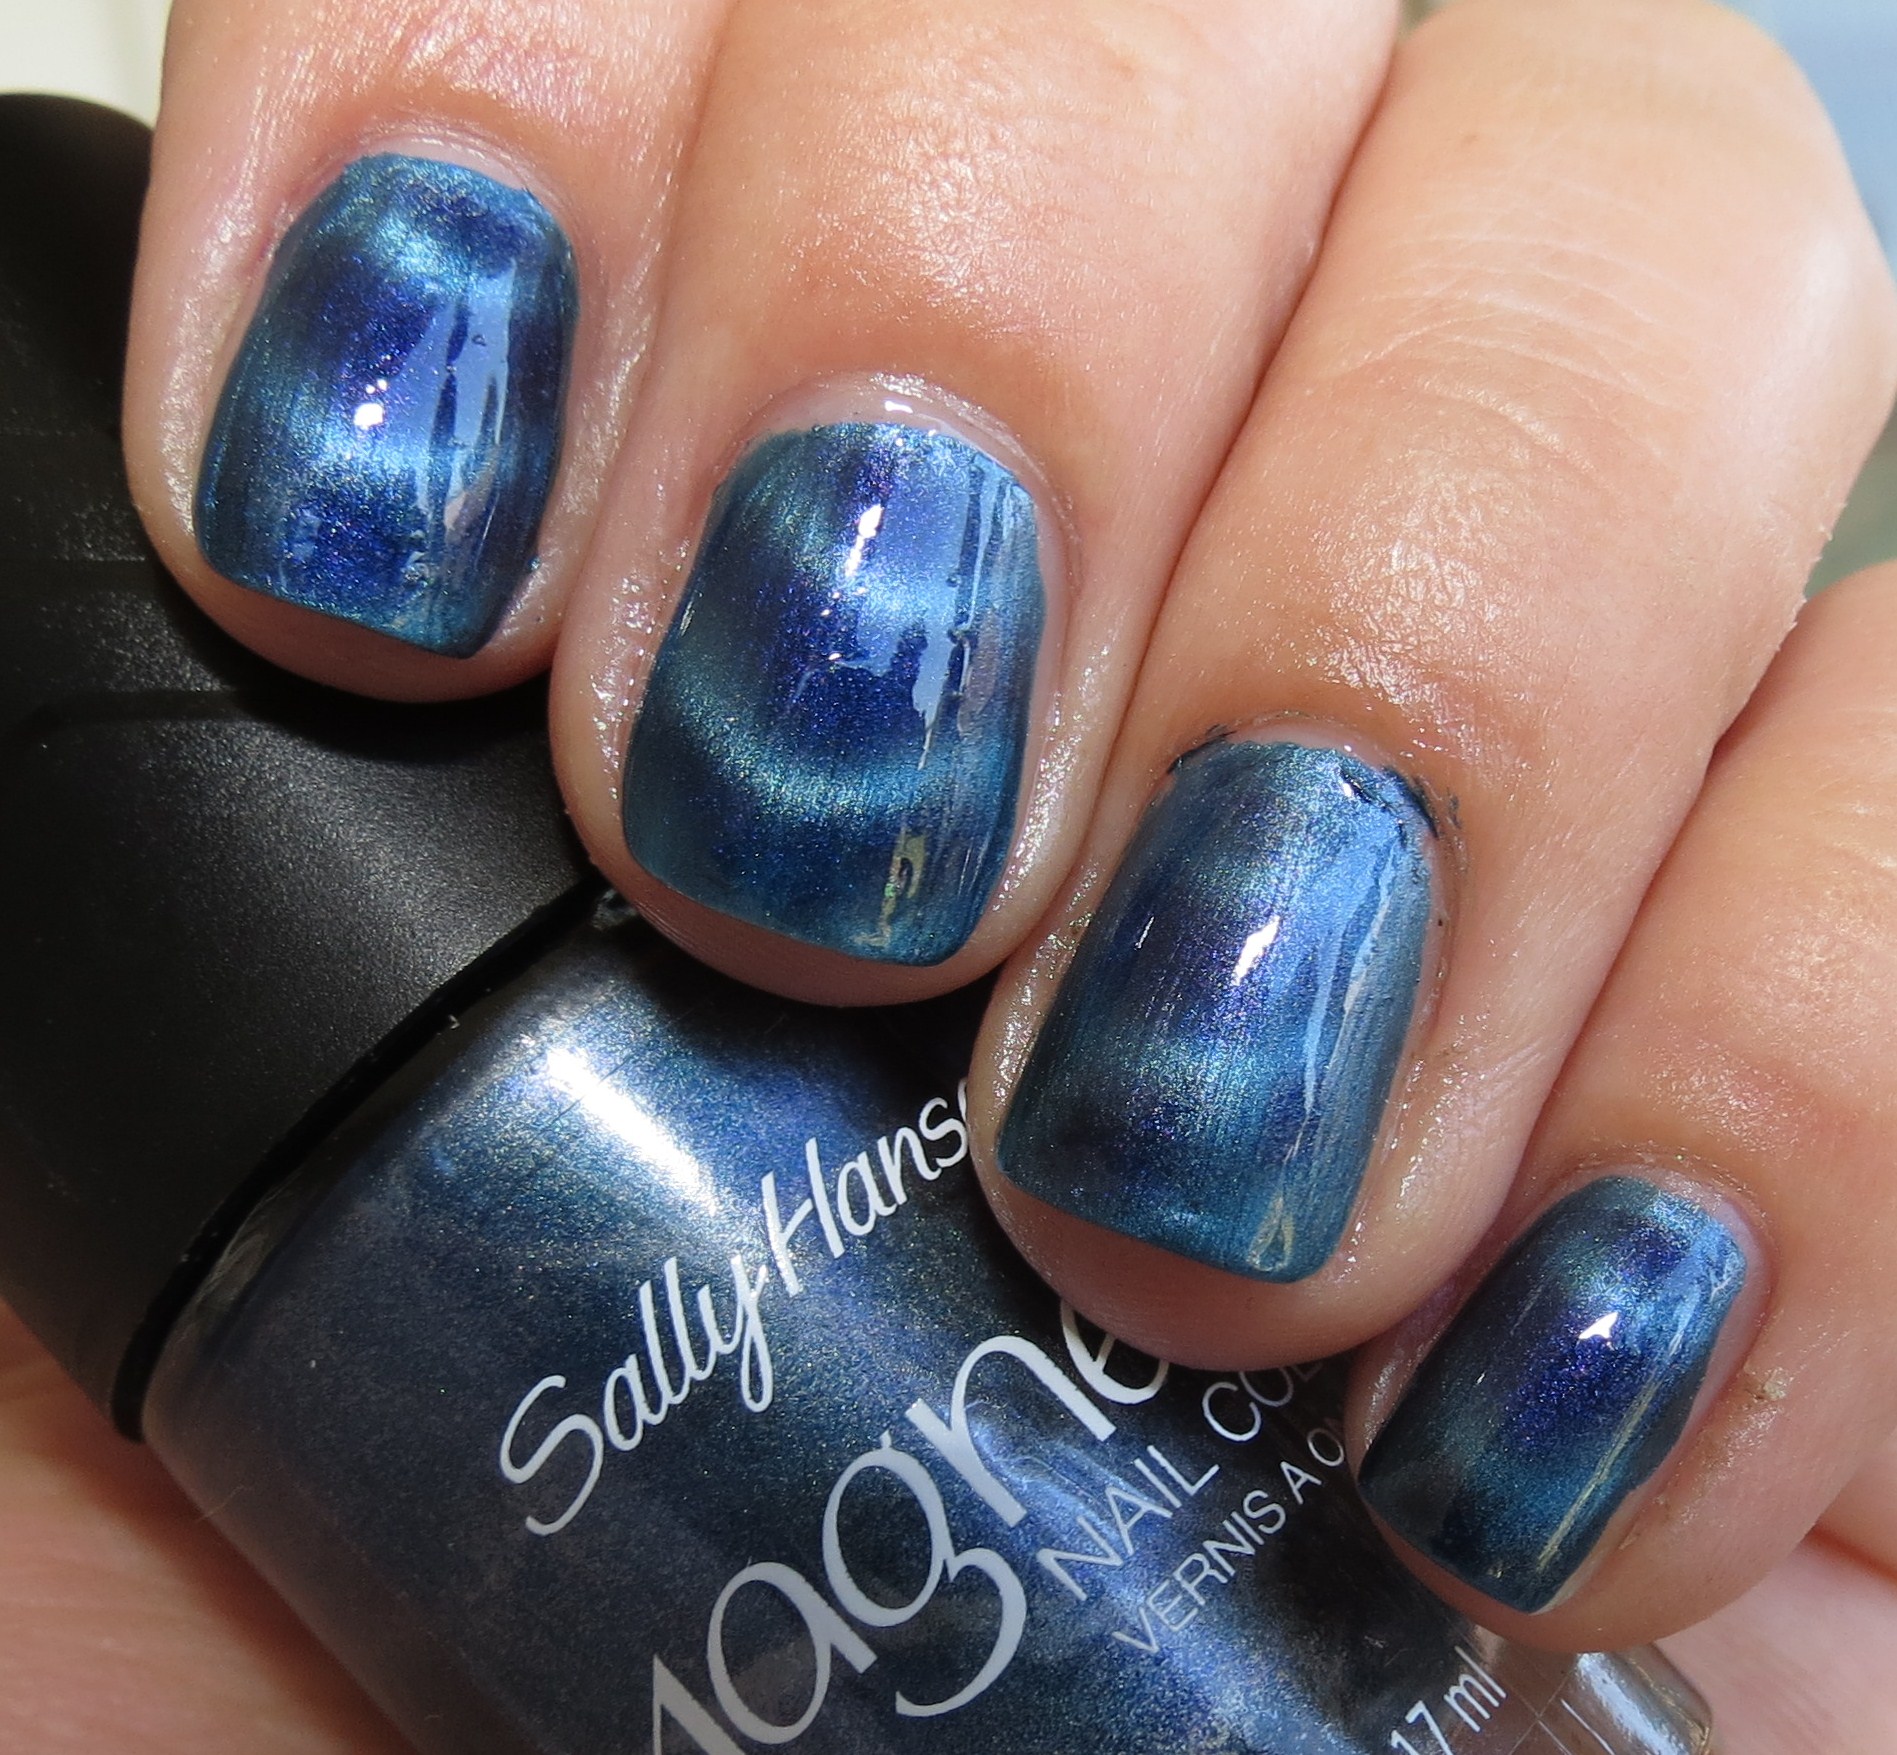 Sally Hansen Magnetic Nail Color Swatches and Review - Blushing Noir